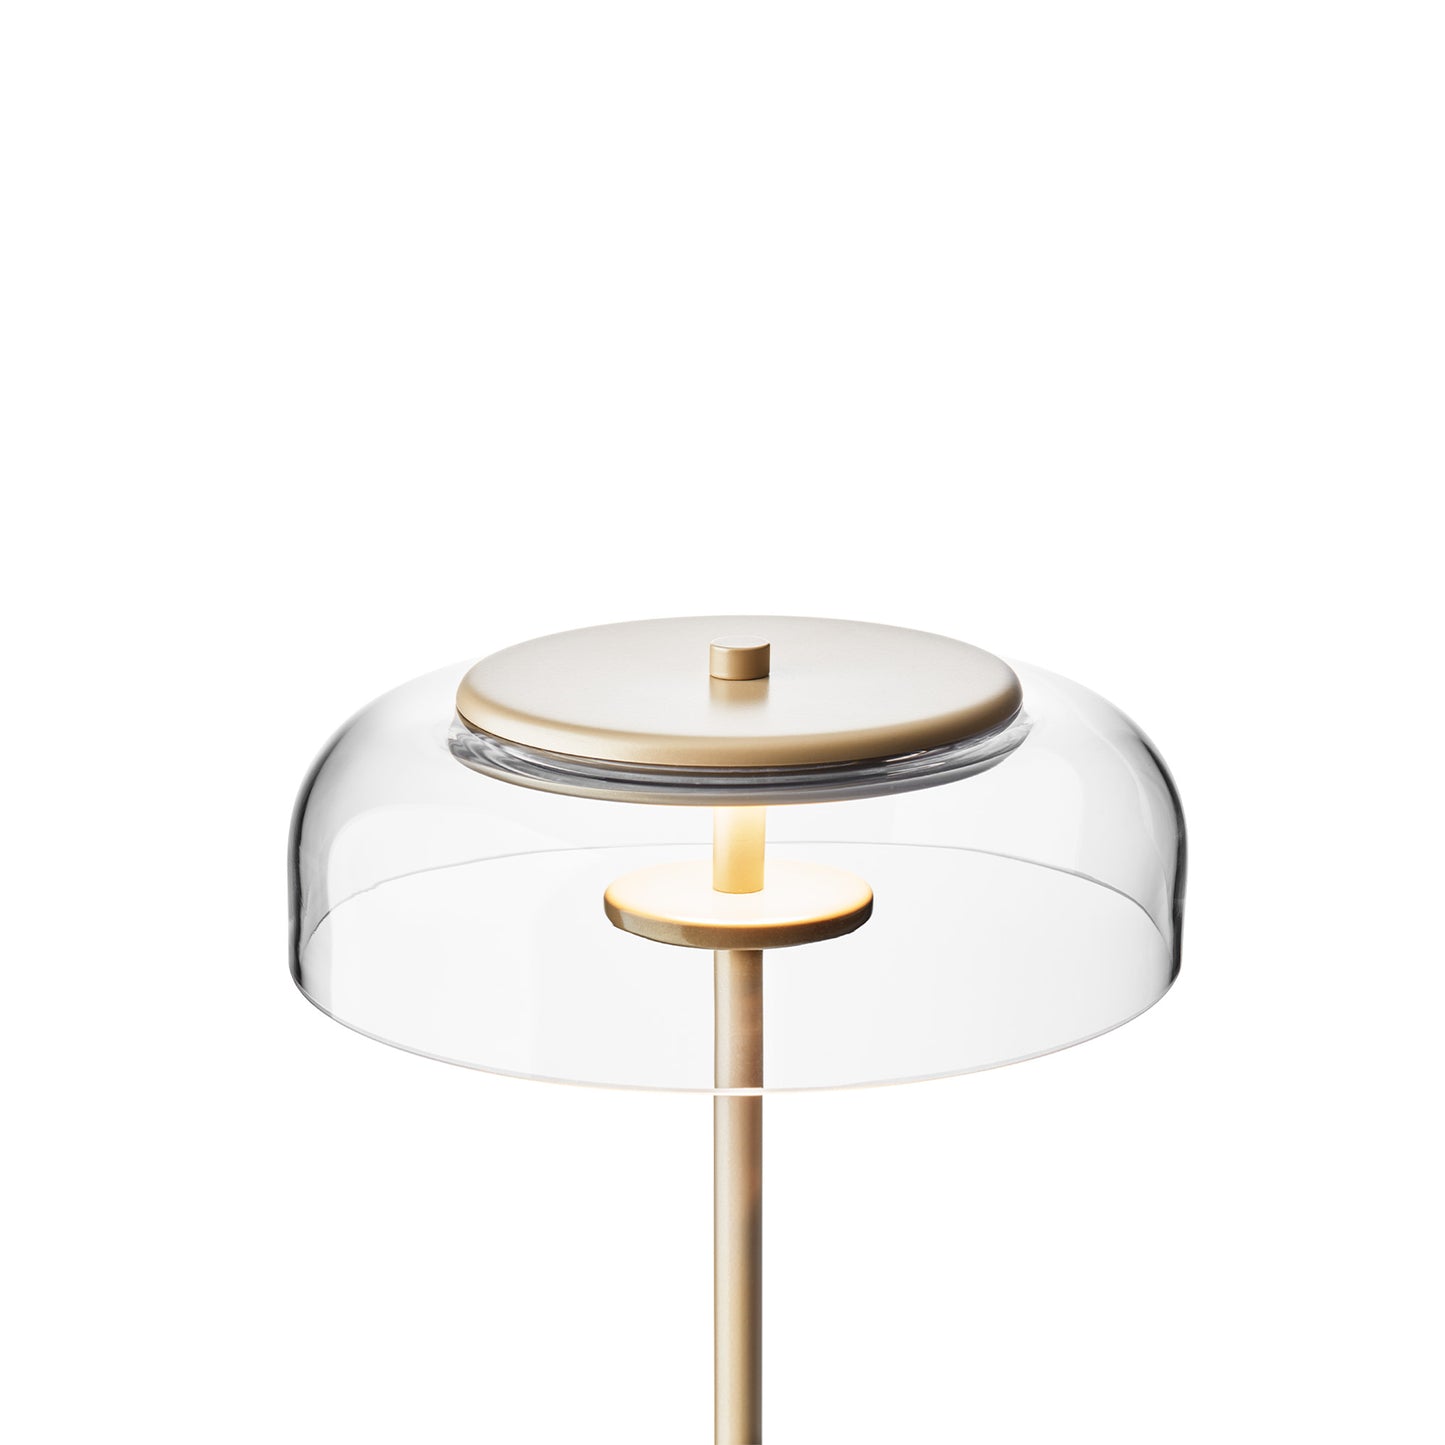 NUURA Blossi Table - Nordic Gold with Clear Glass Shade - 25% Off